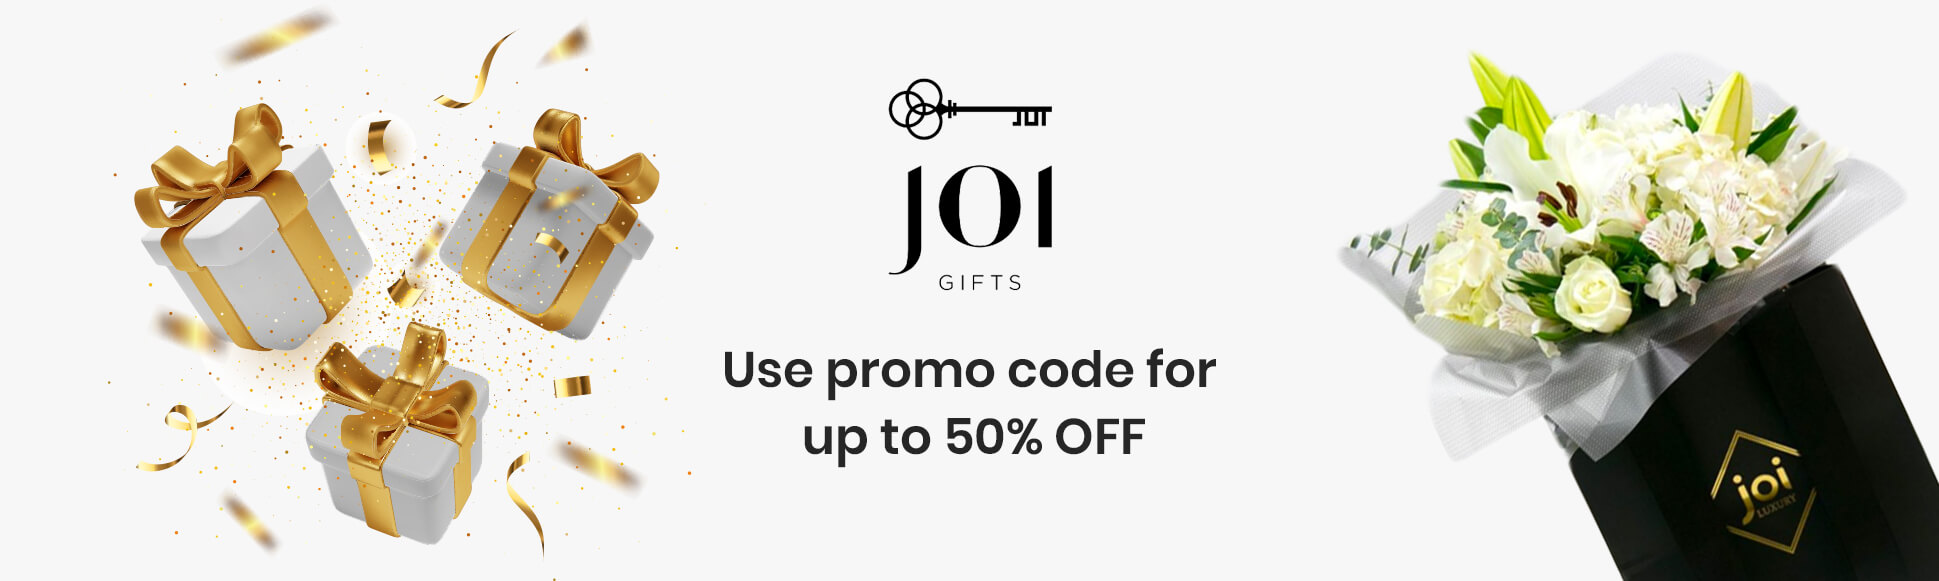 Joi Gifts Promo Code 